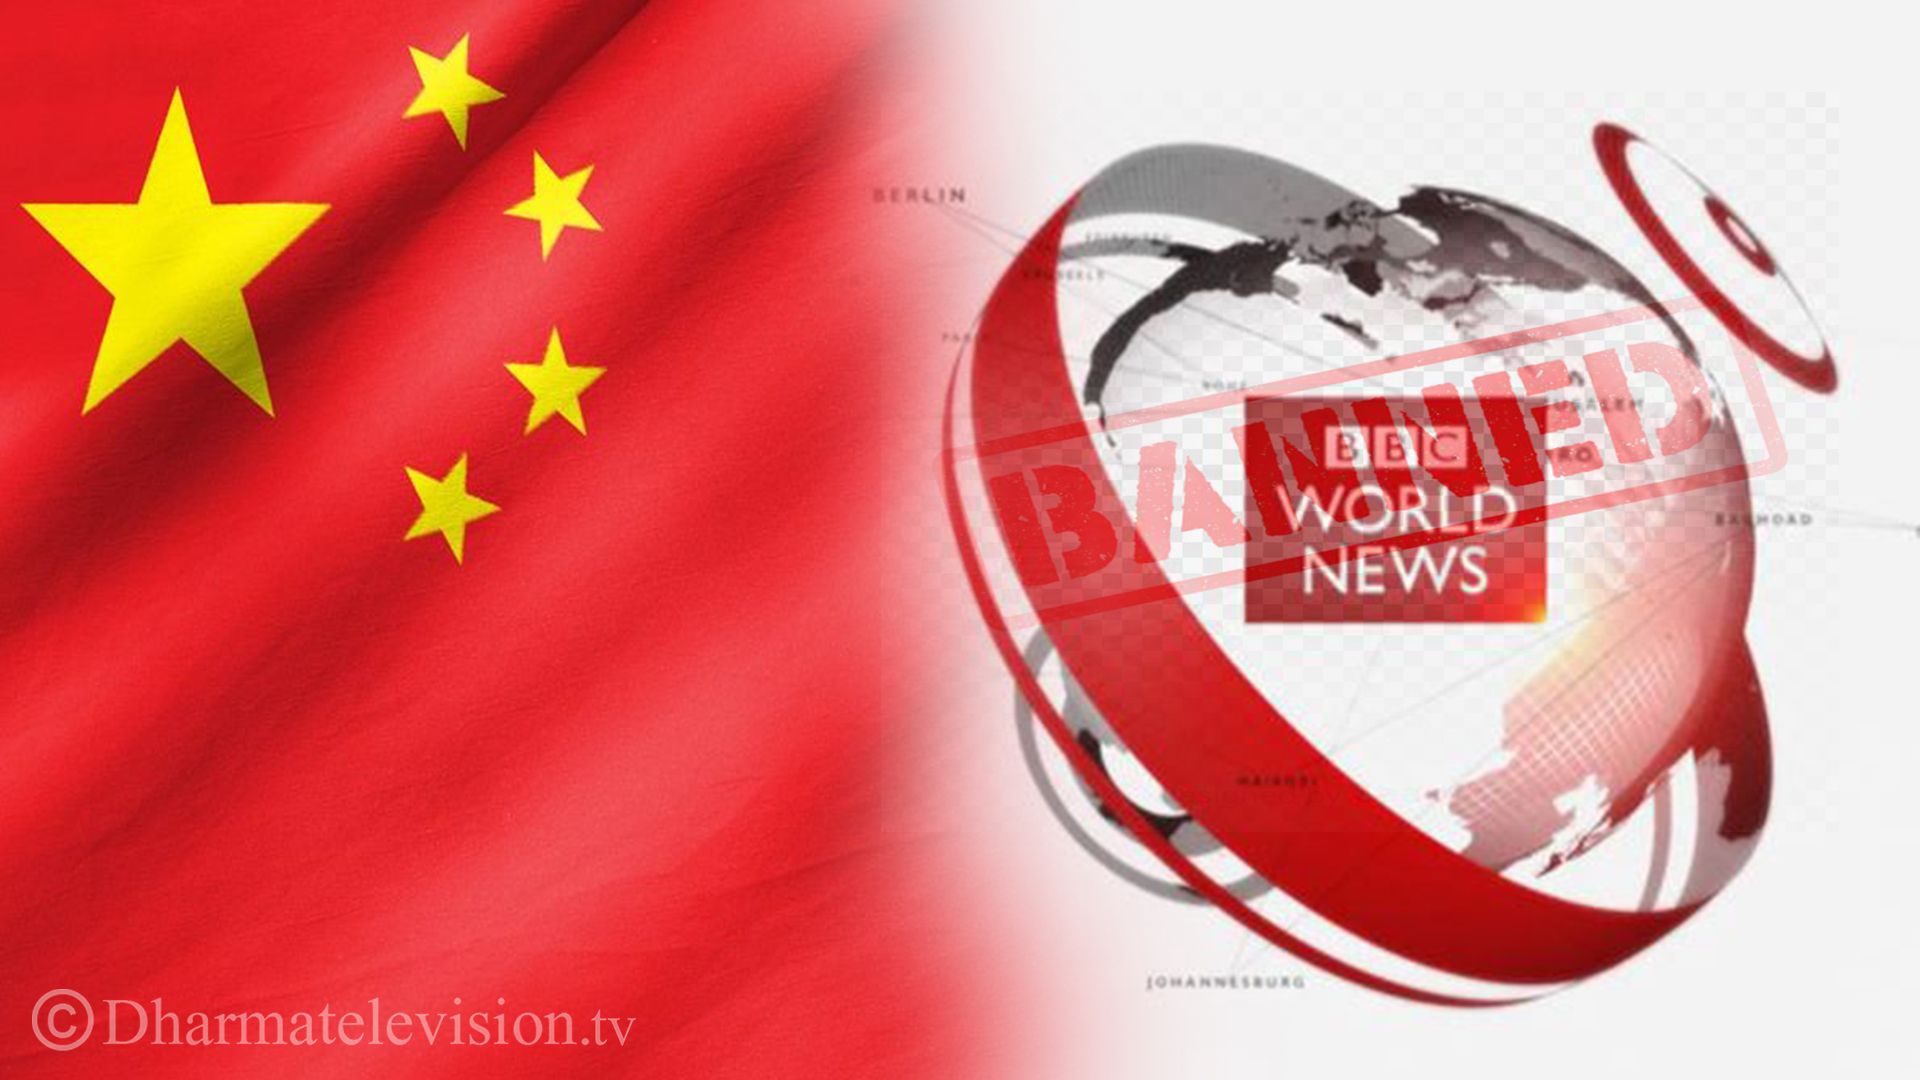 BBC World News banned in China